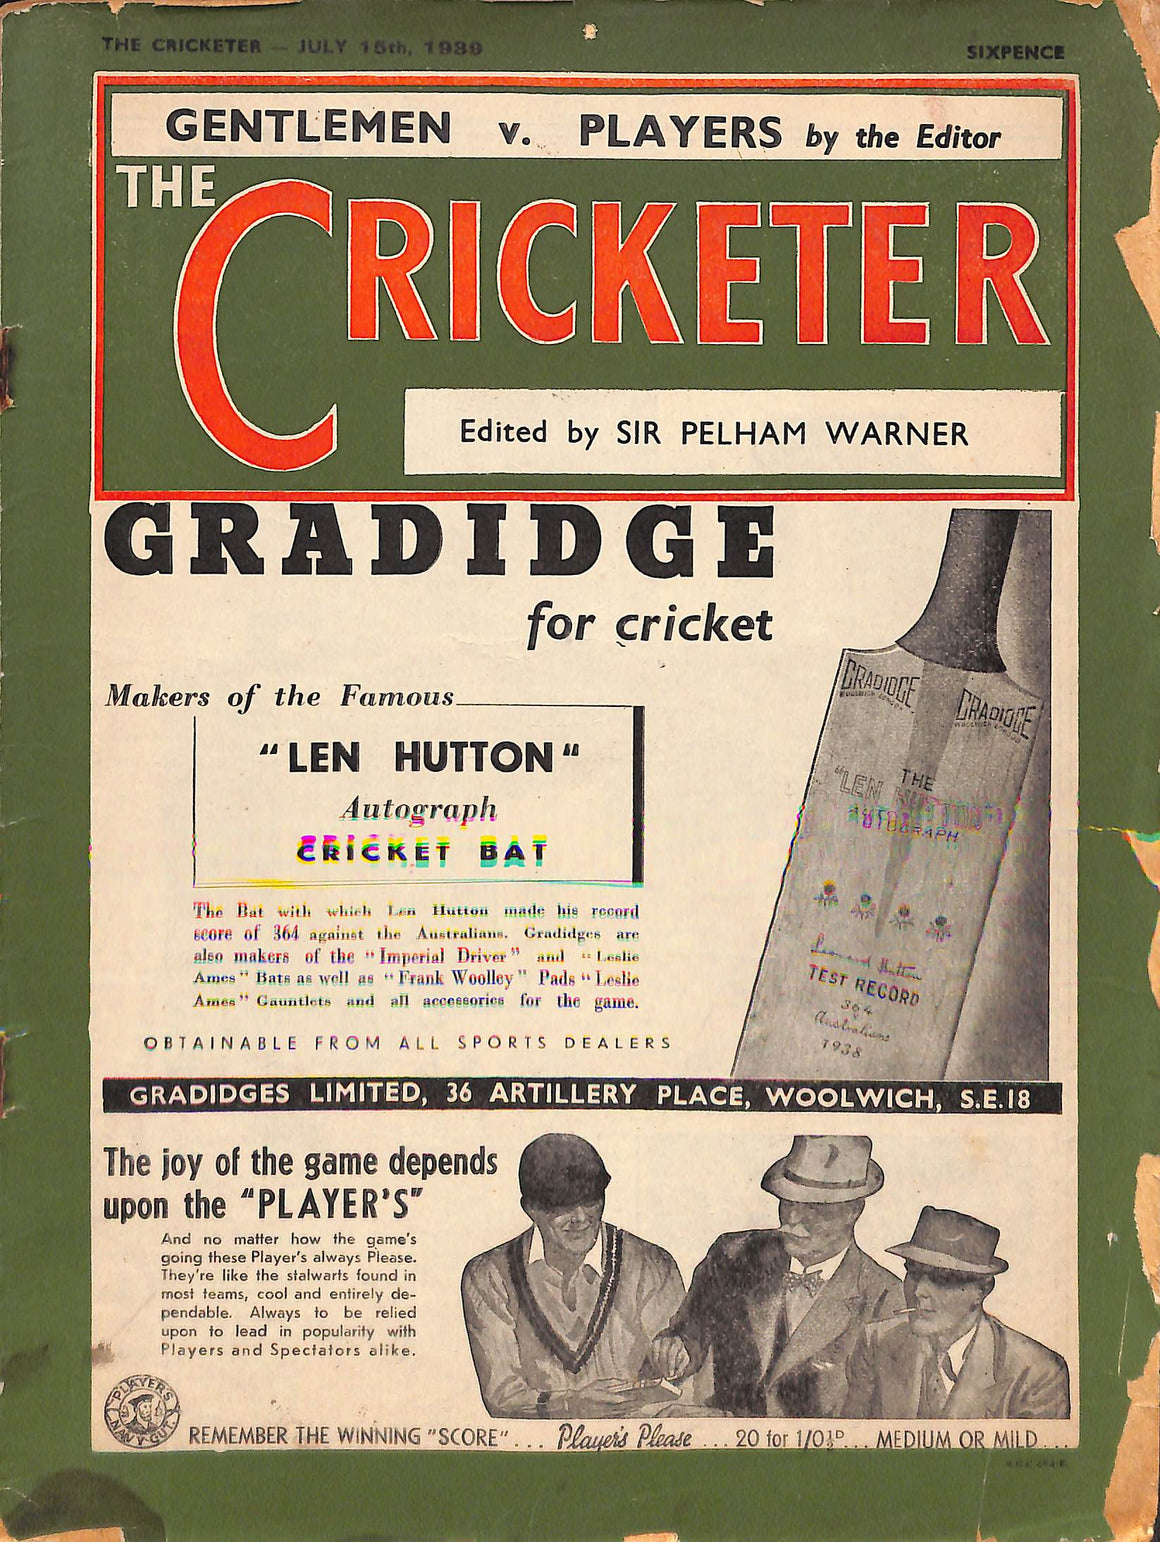 'The Cricketer - July 15th, 1939'